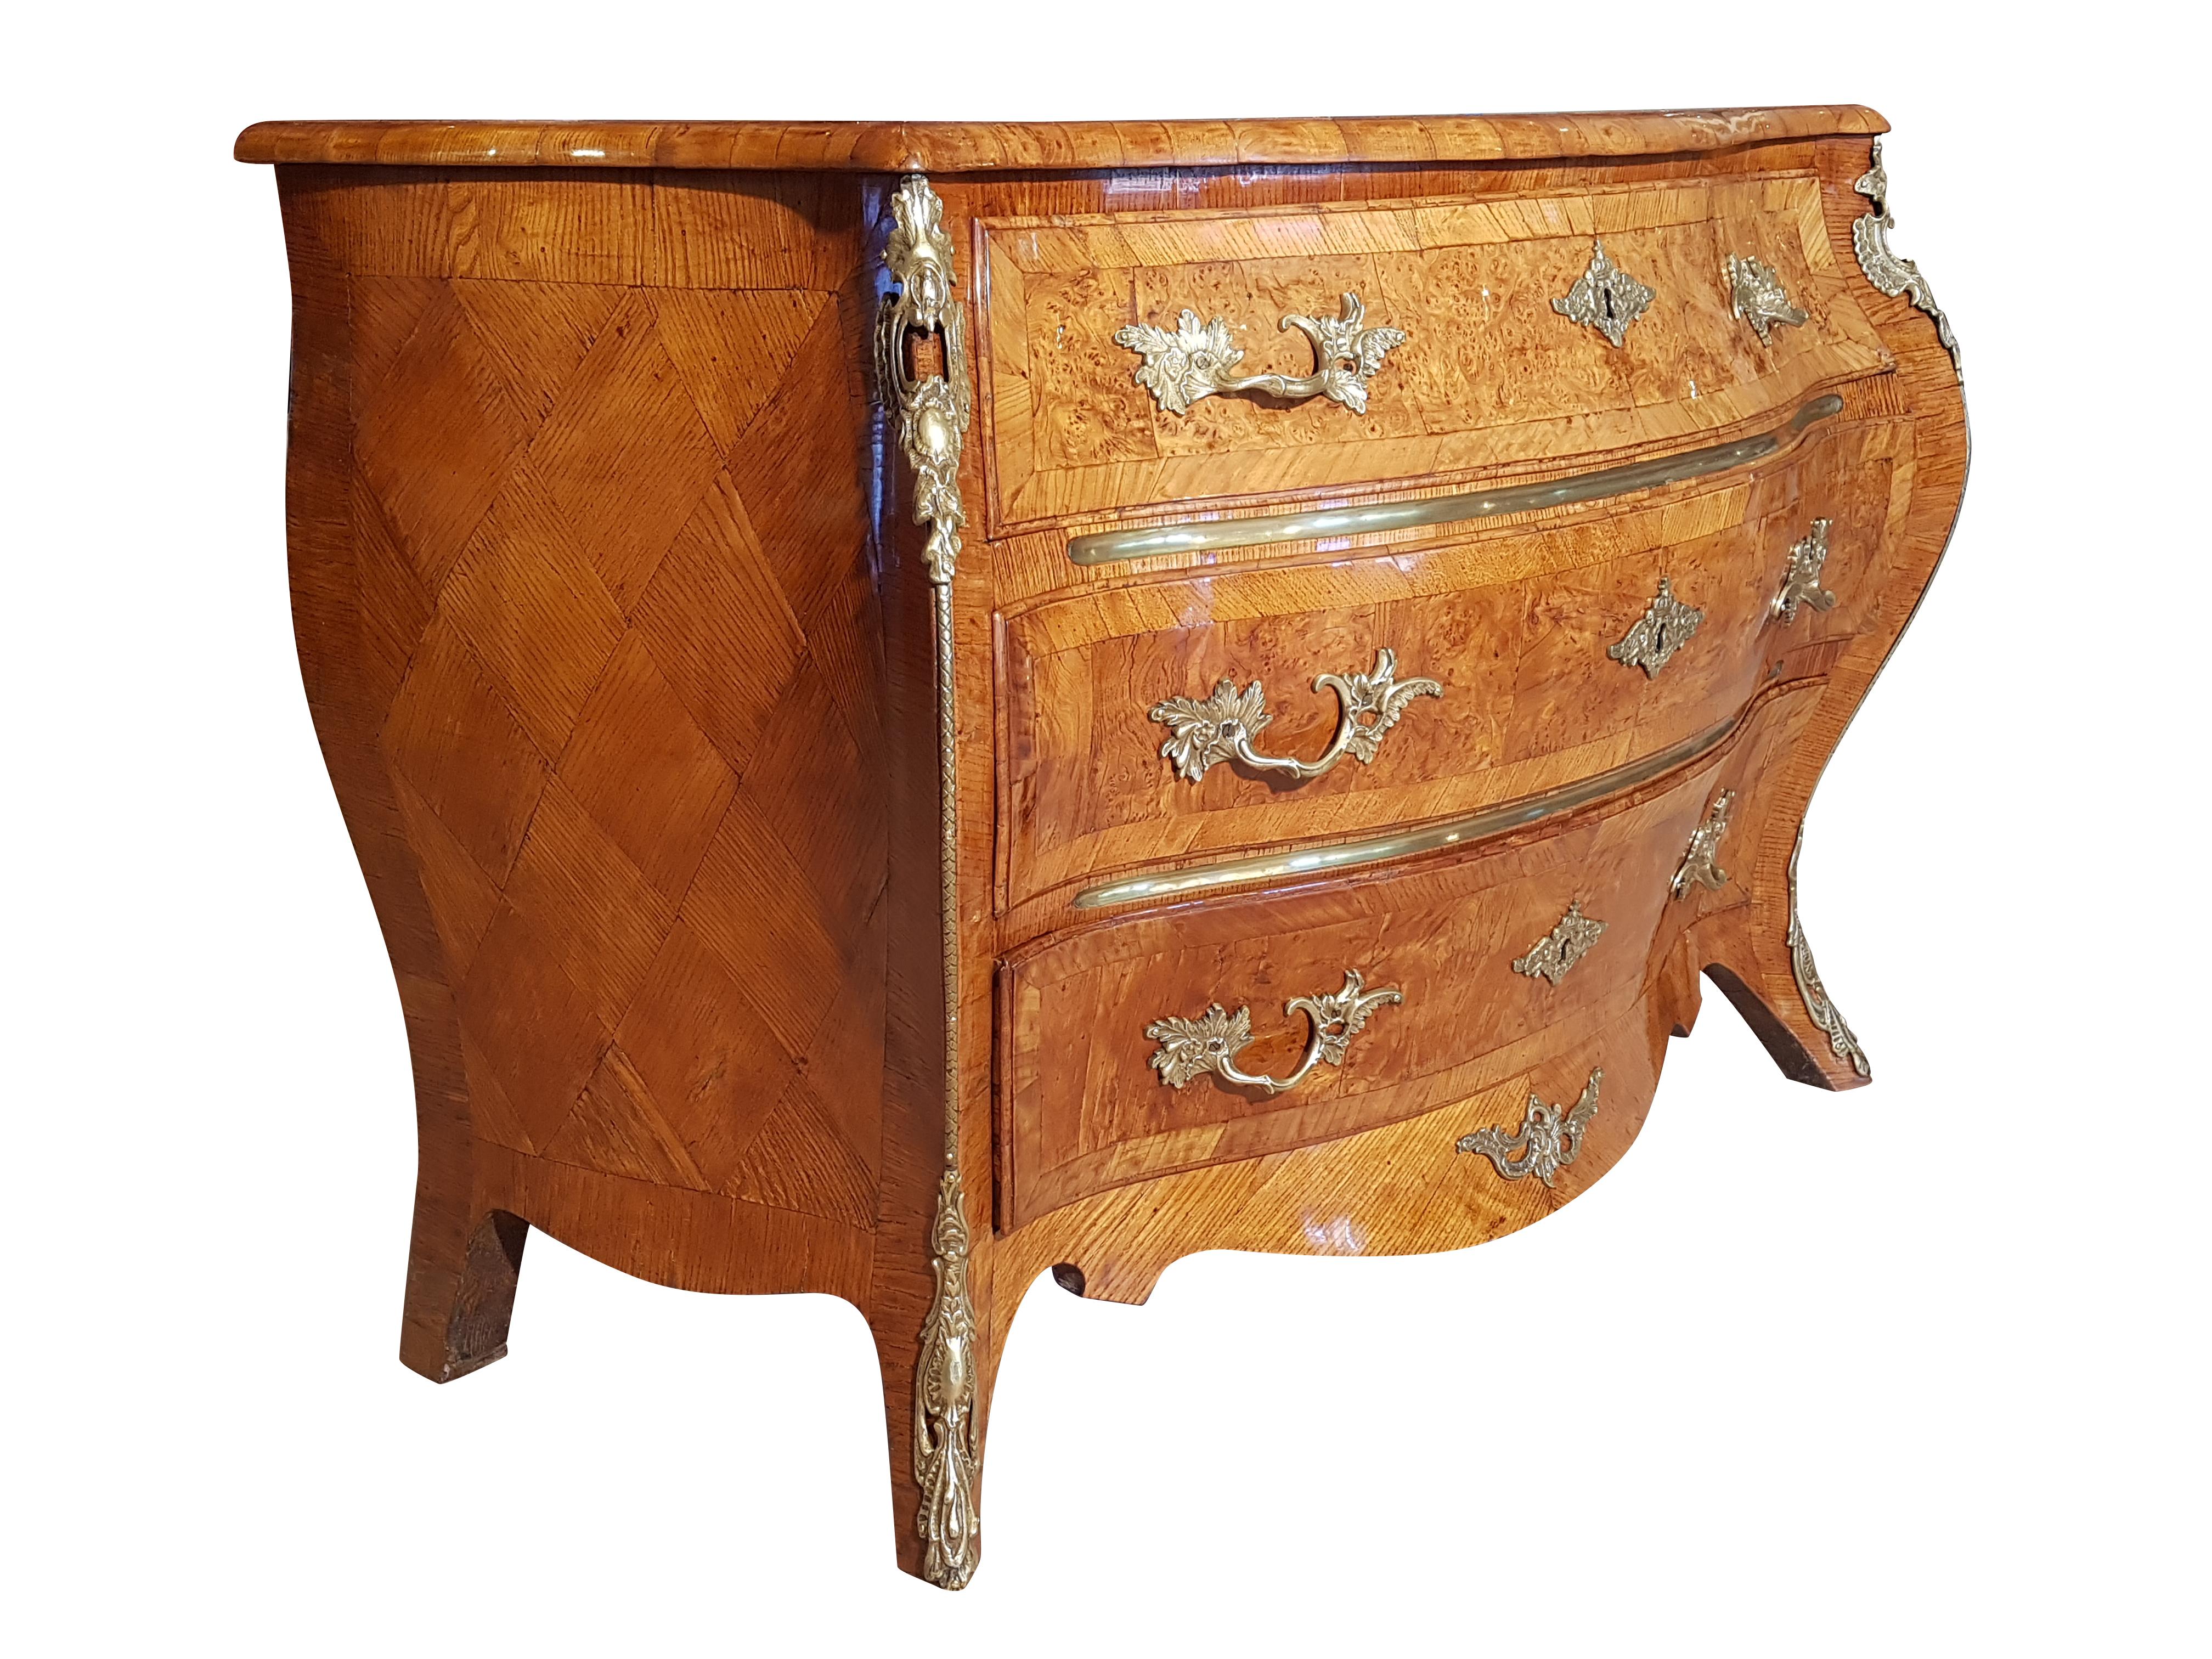 A Swedish commode from the second half of the 18th century. The commode is getting completely restored preserving the patina and polished by hand matt or shiny or treated with antique wax. This piece has a very curved body with three big drawers.